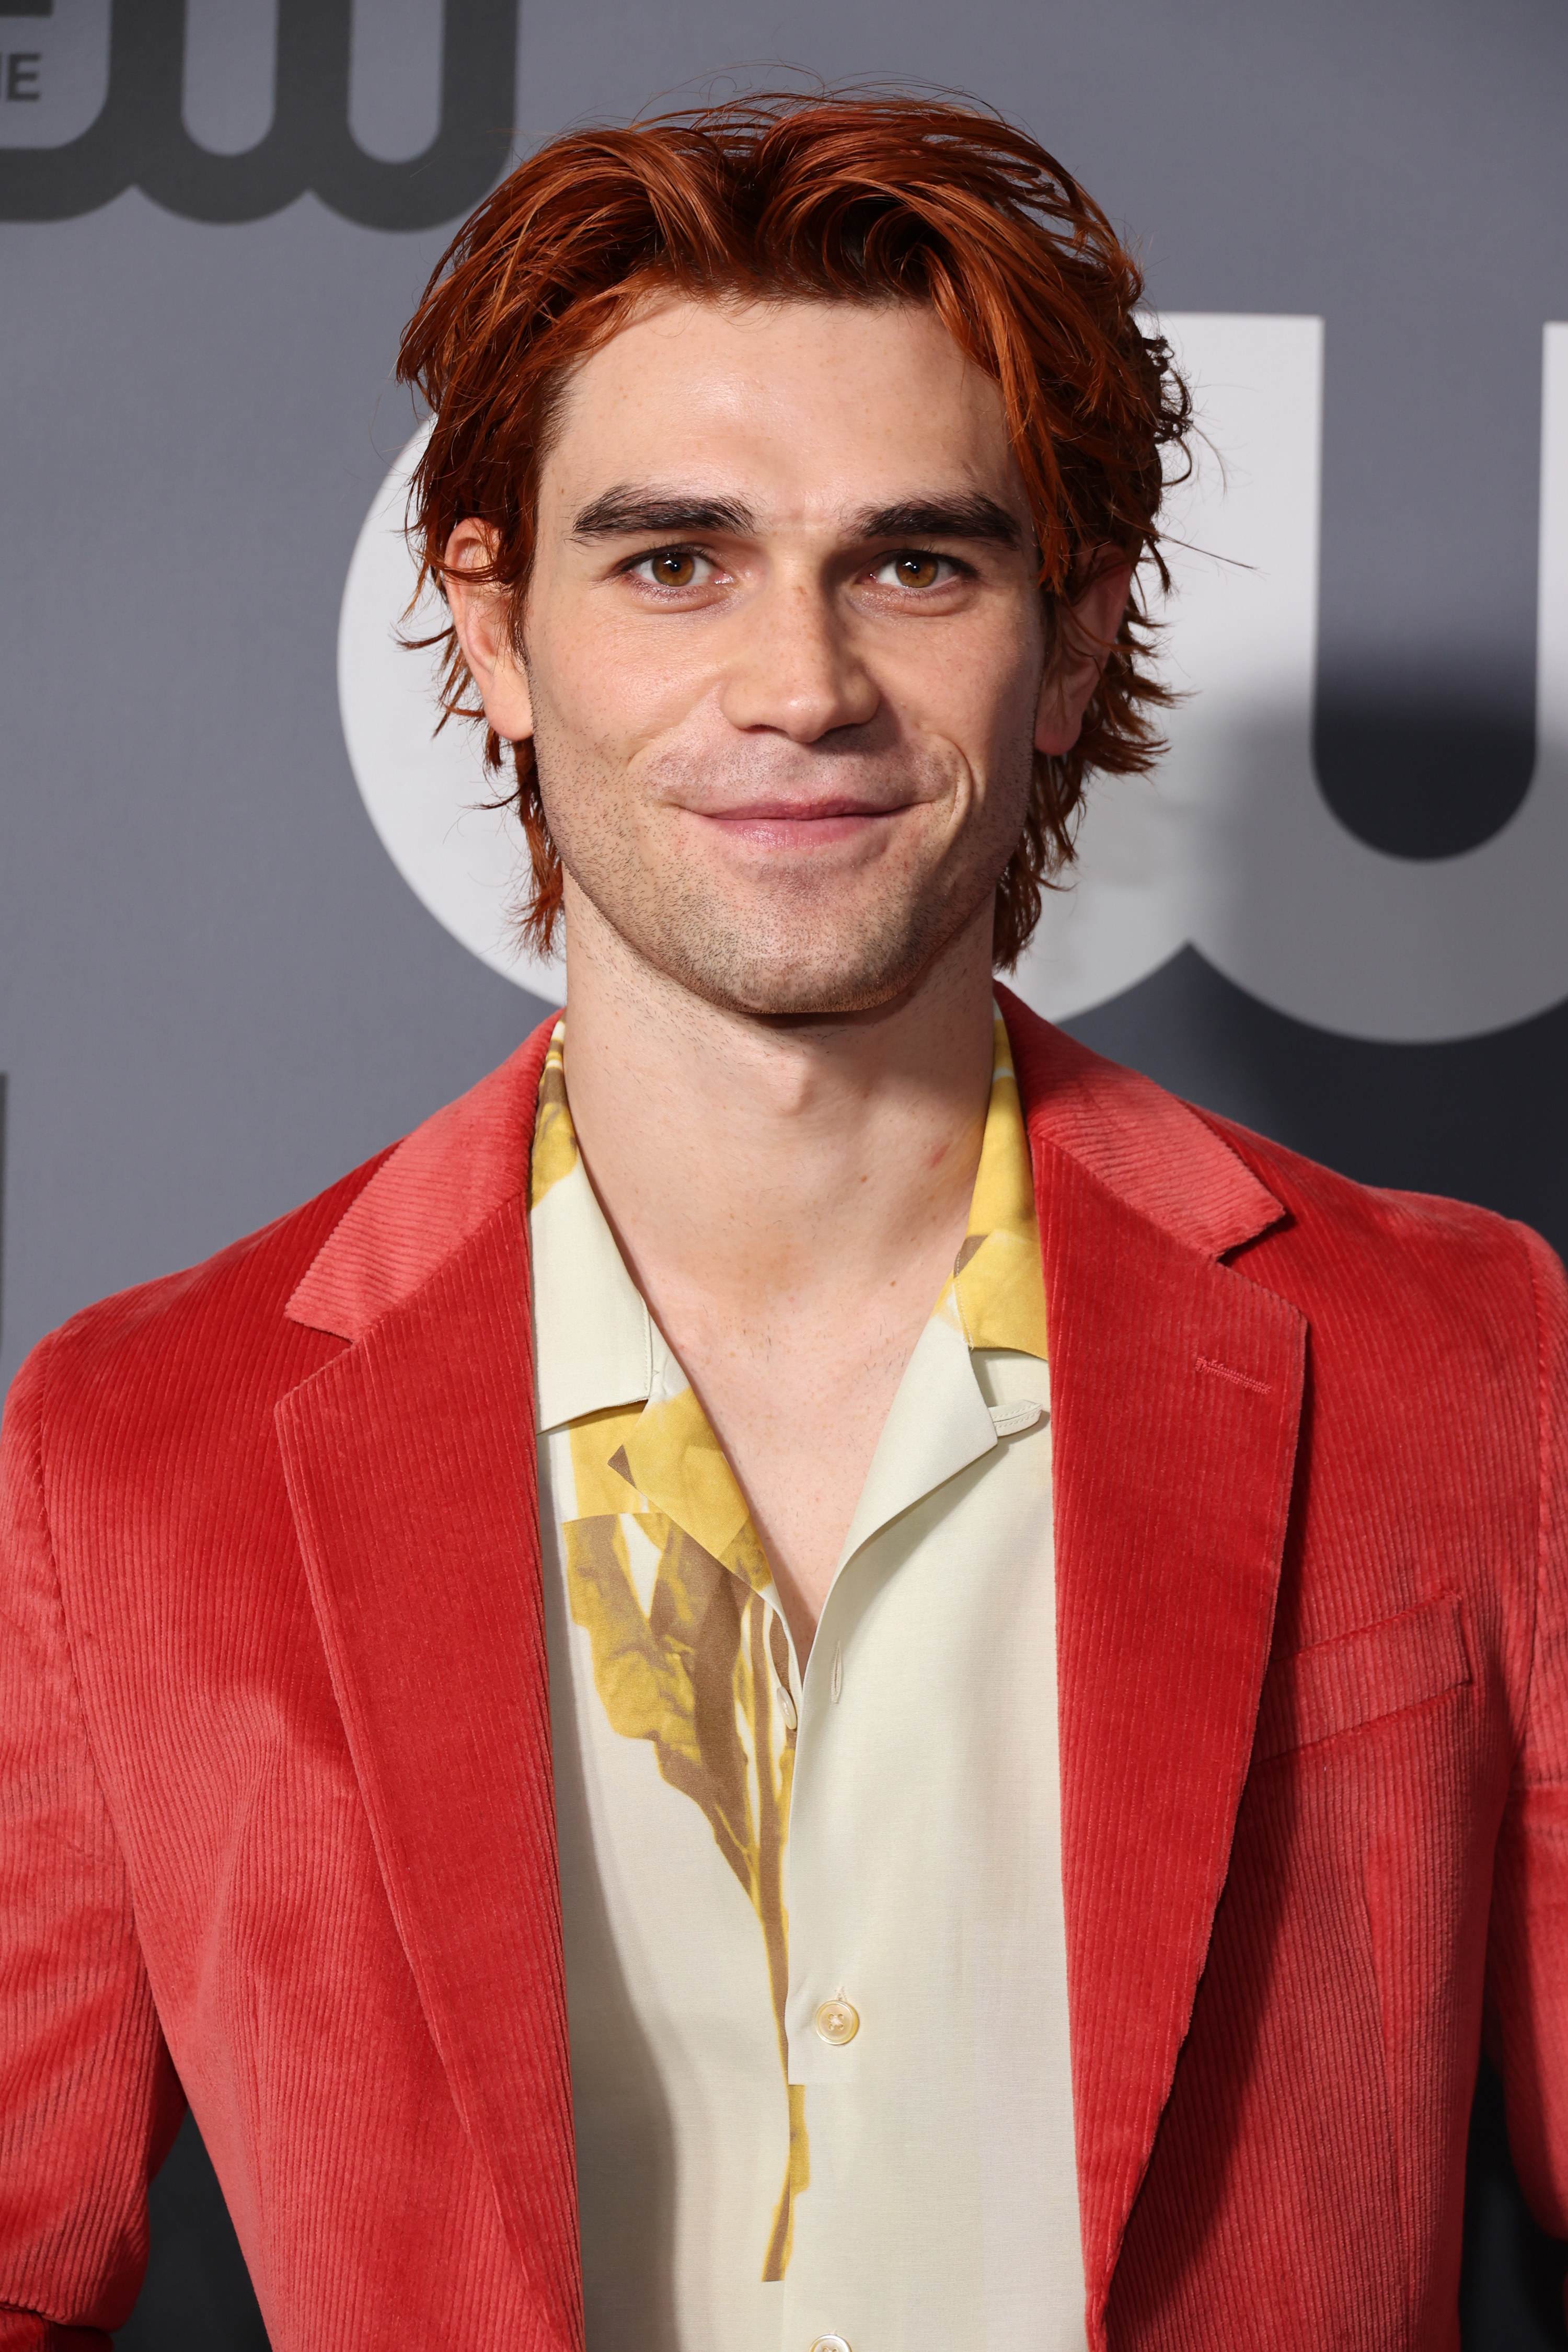 KJ in a red suit